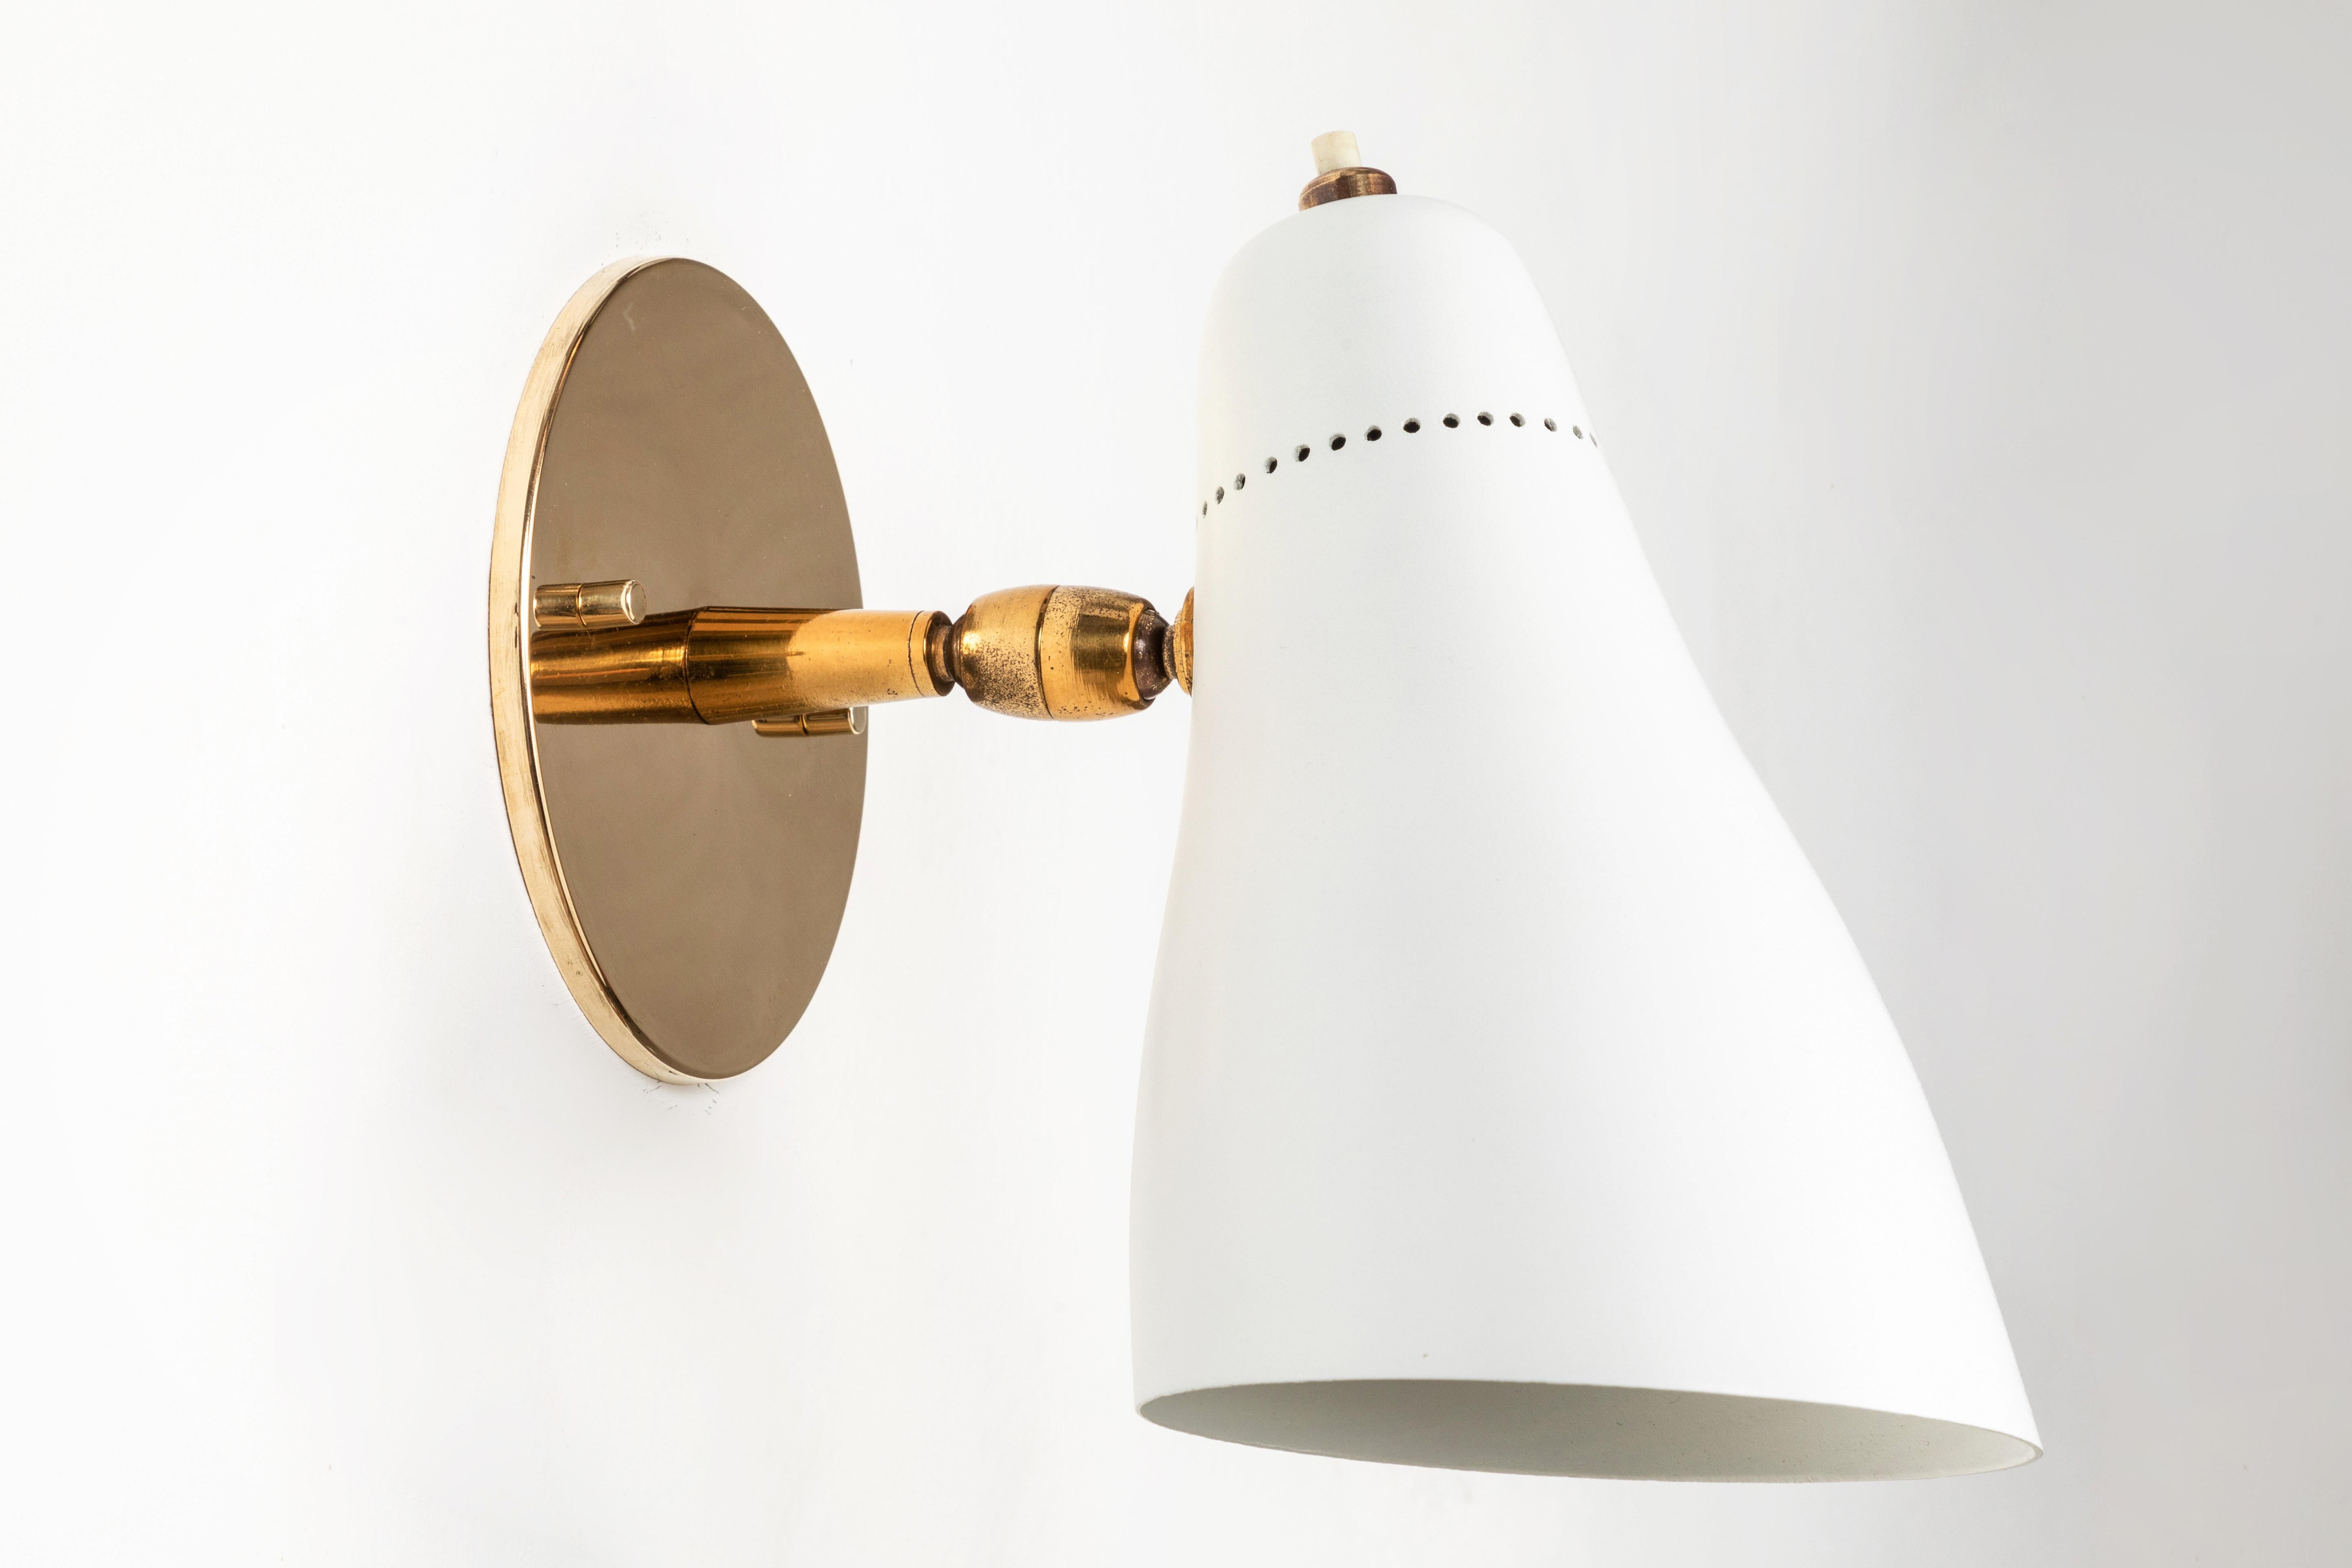 Painted Gino Sarfatti Perforated Cone Sconce for Arteluce, circa 1950